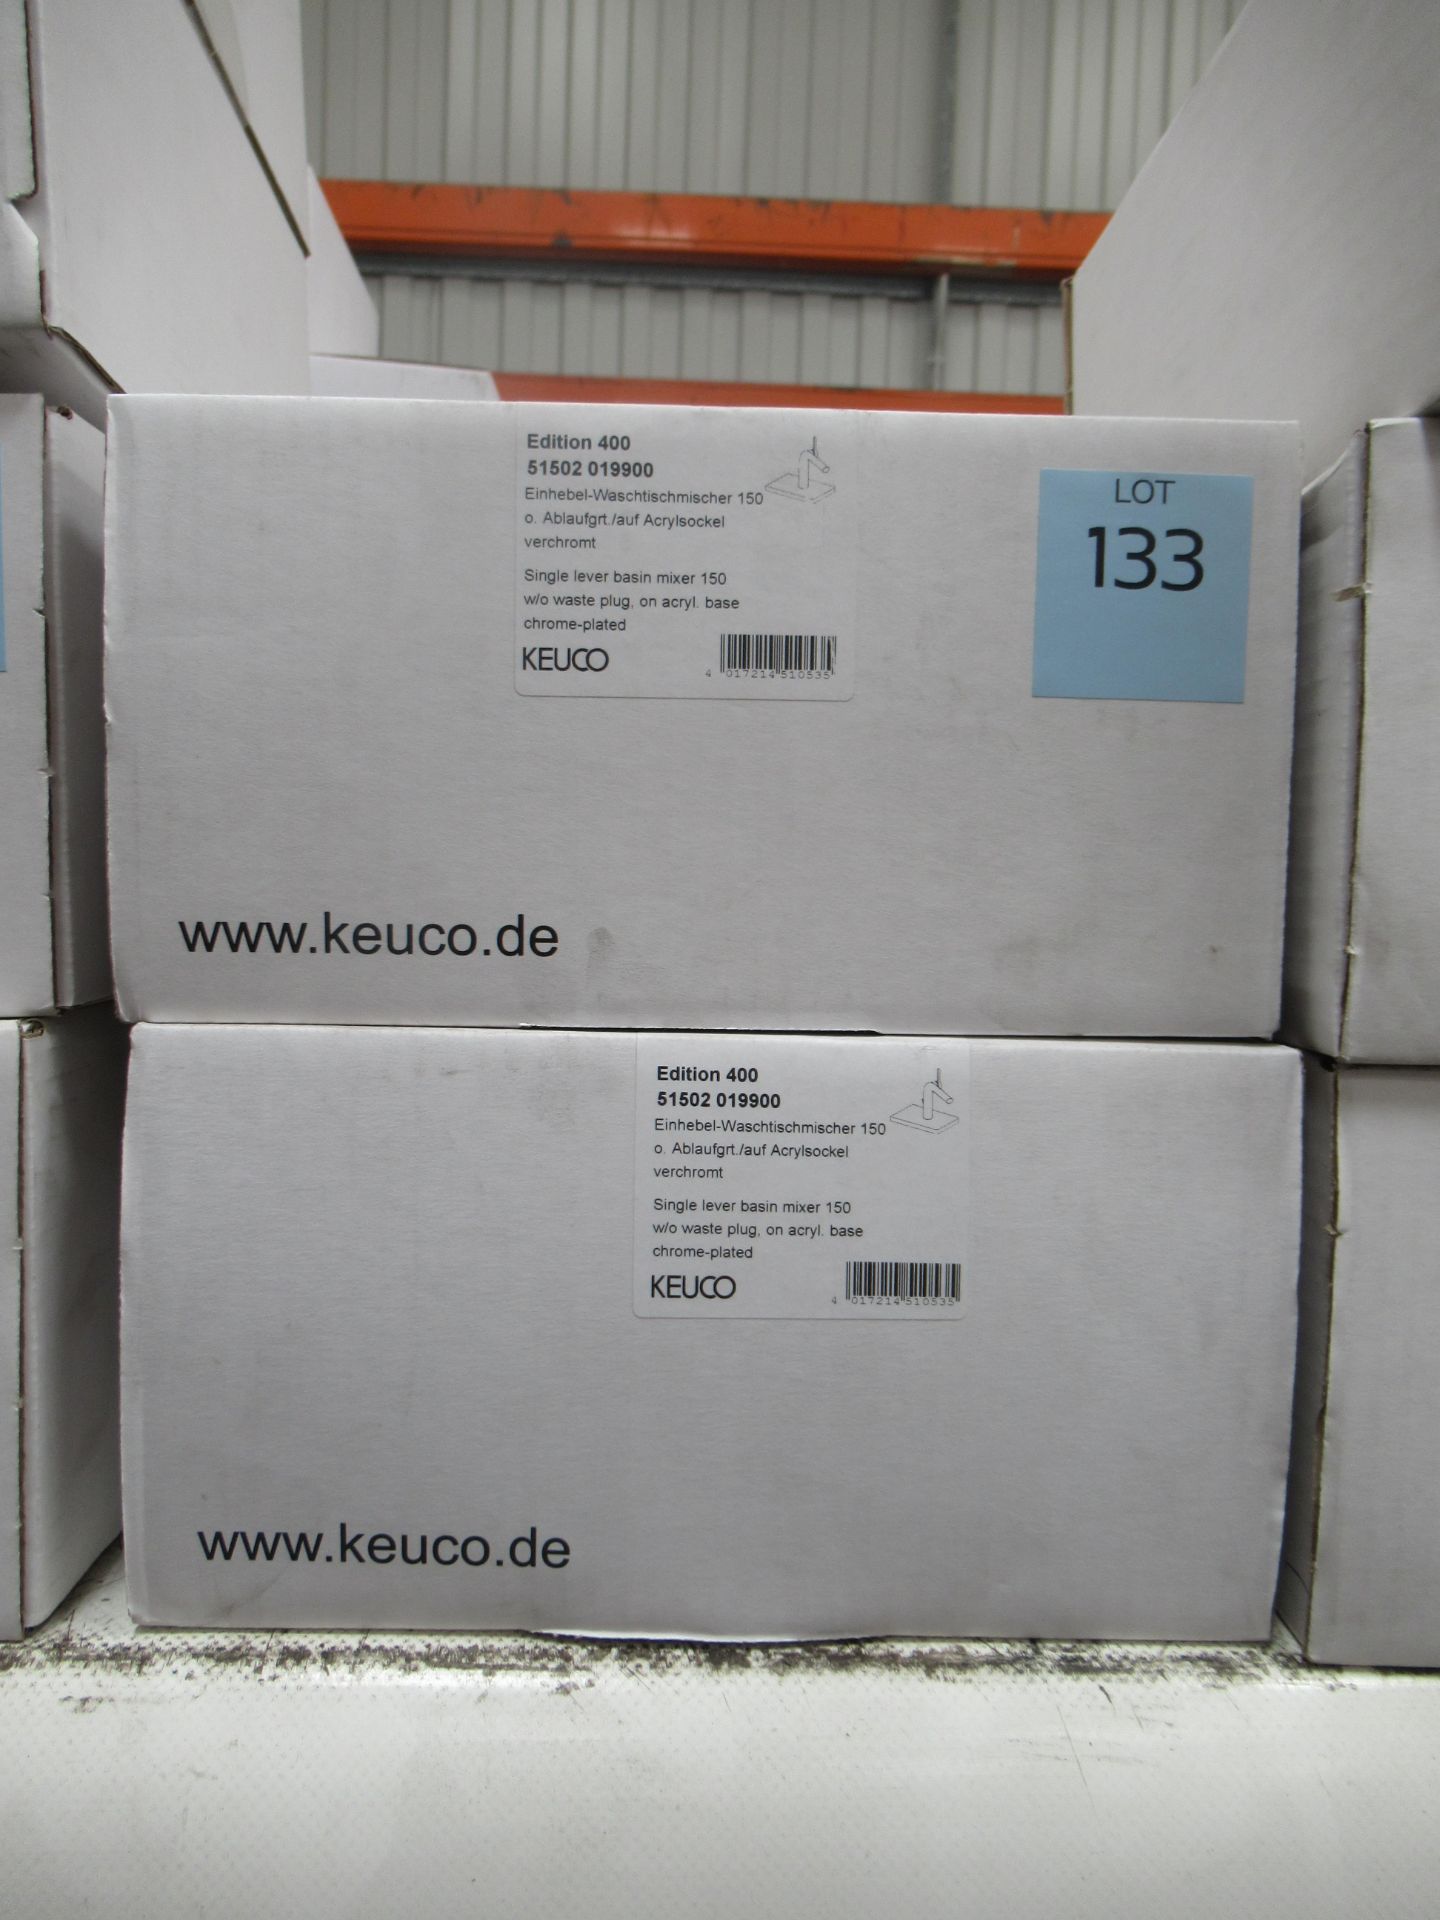 2 x Keuco Edition 400 Single Lever Basin Mixer 150-Tap, Chrome Plated, P/N 51502-019900